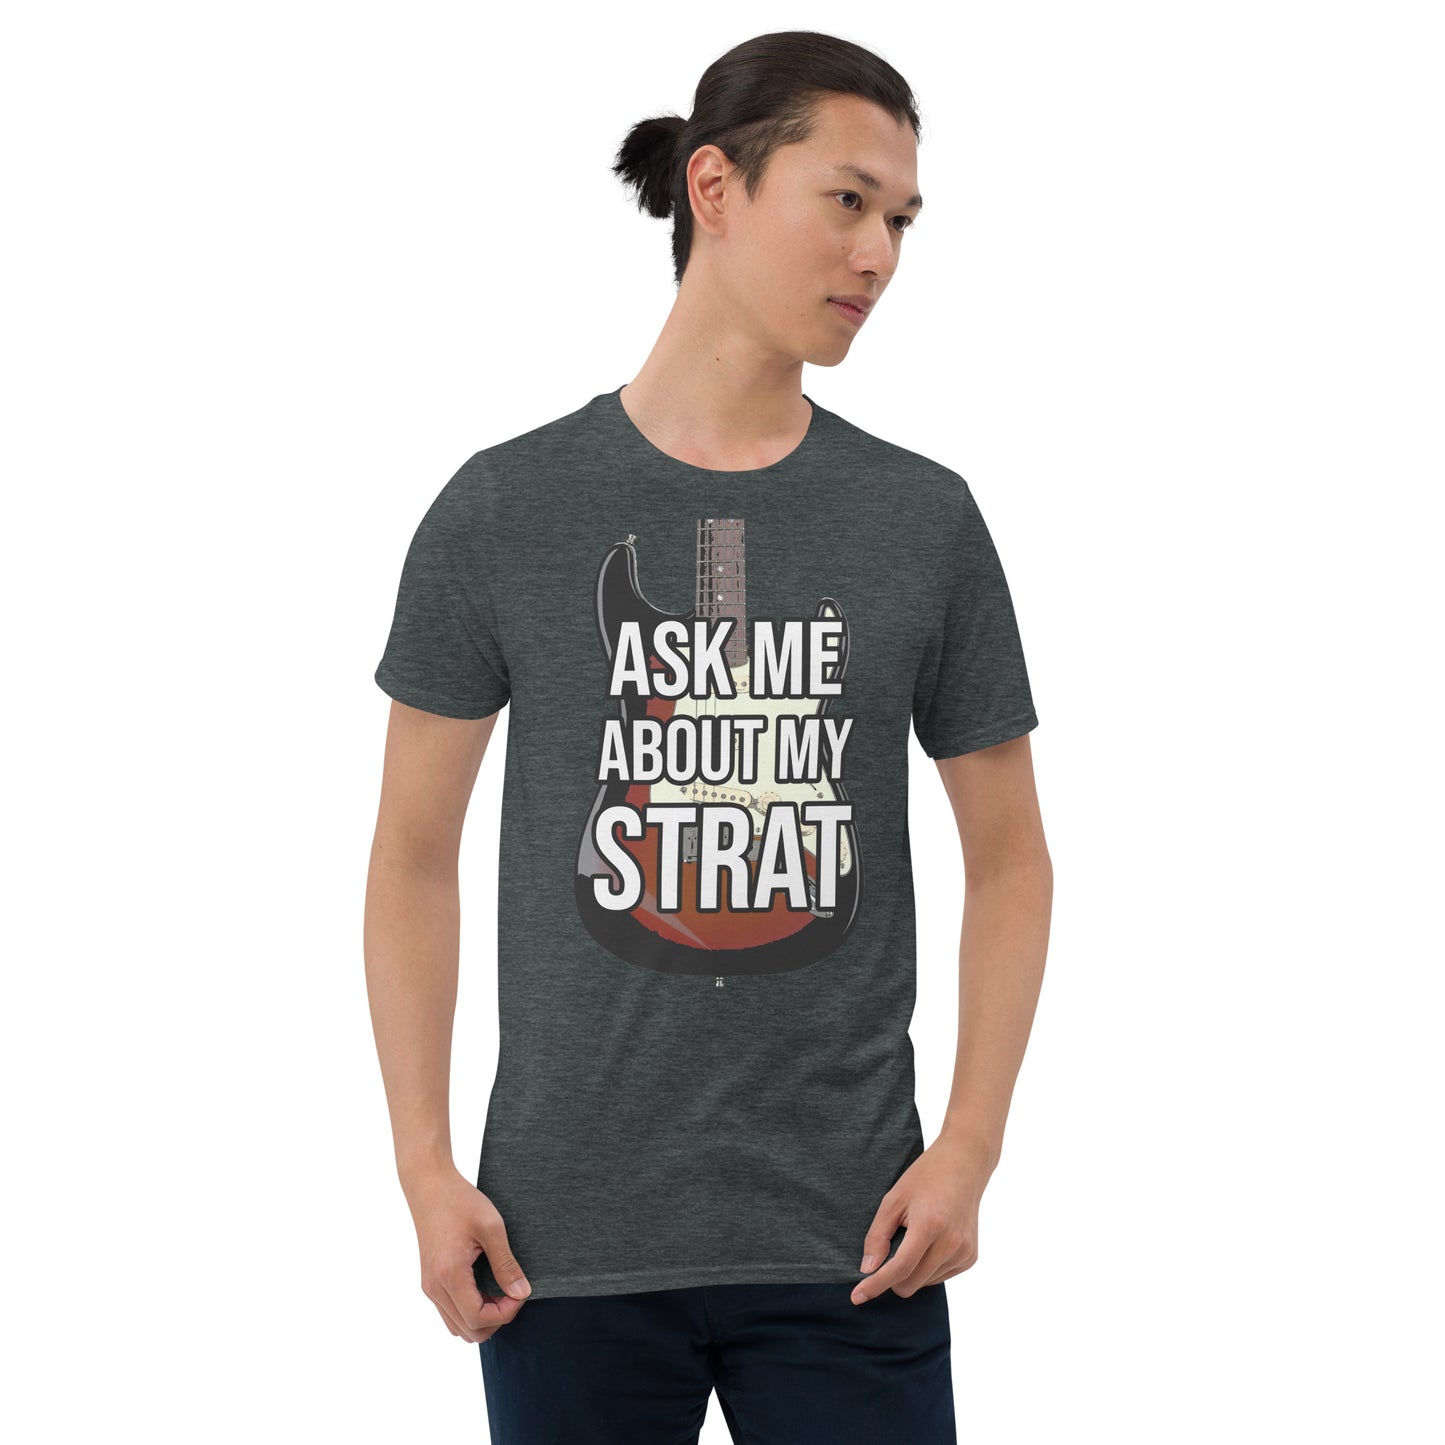 Guitar Please "Ask Me About My Strat" Short-Sleeve Unisex T-Shirt